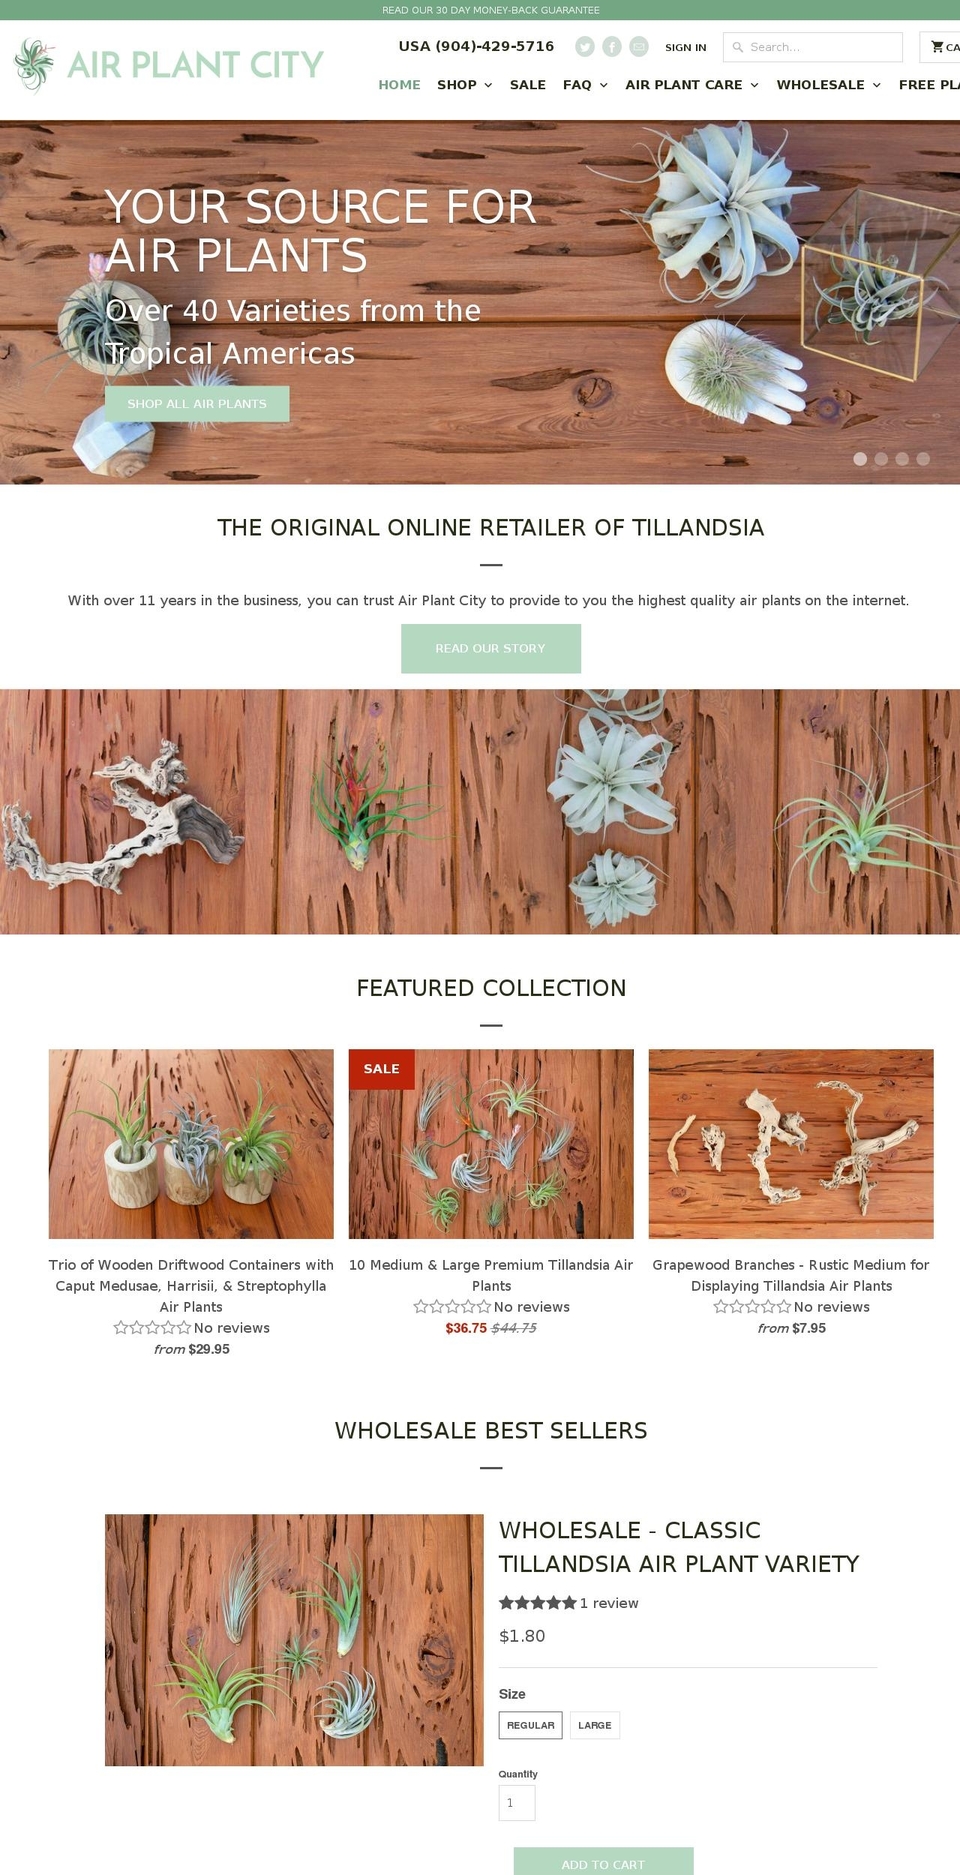 Expanse Shopify theme site example airplantcity.com